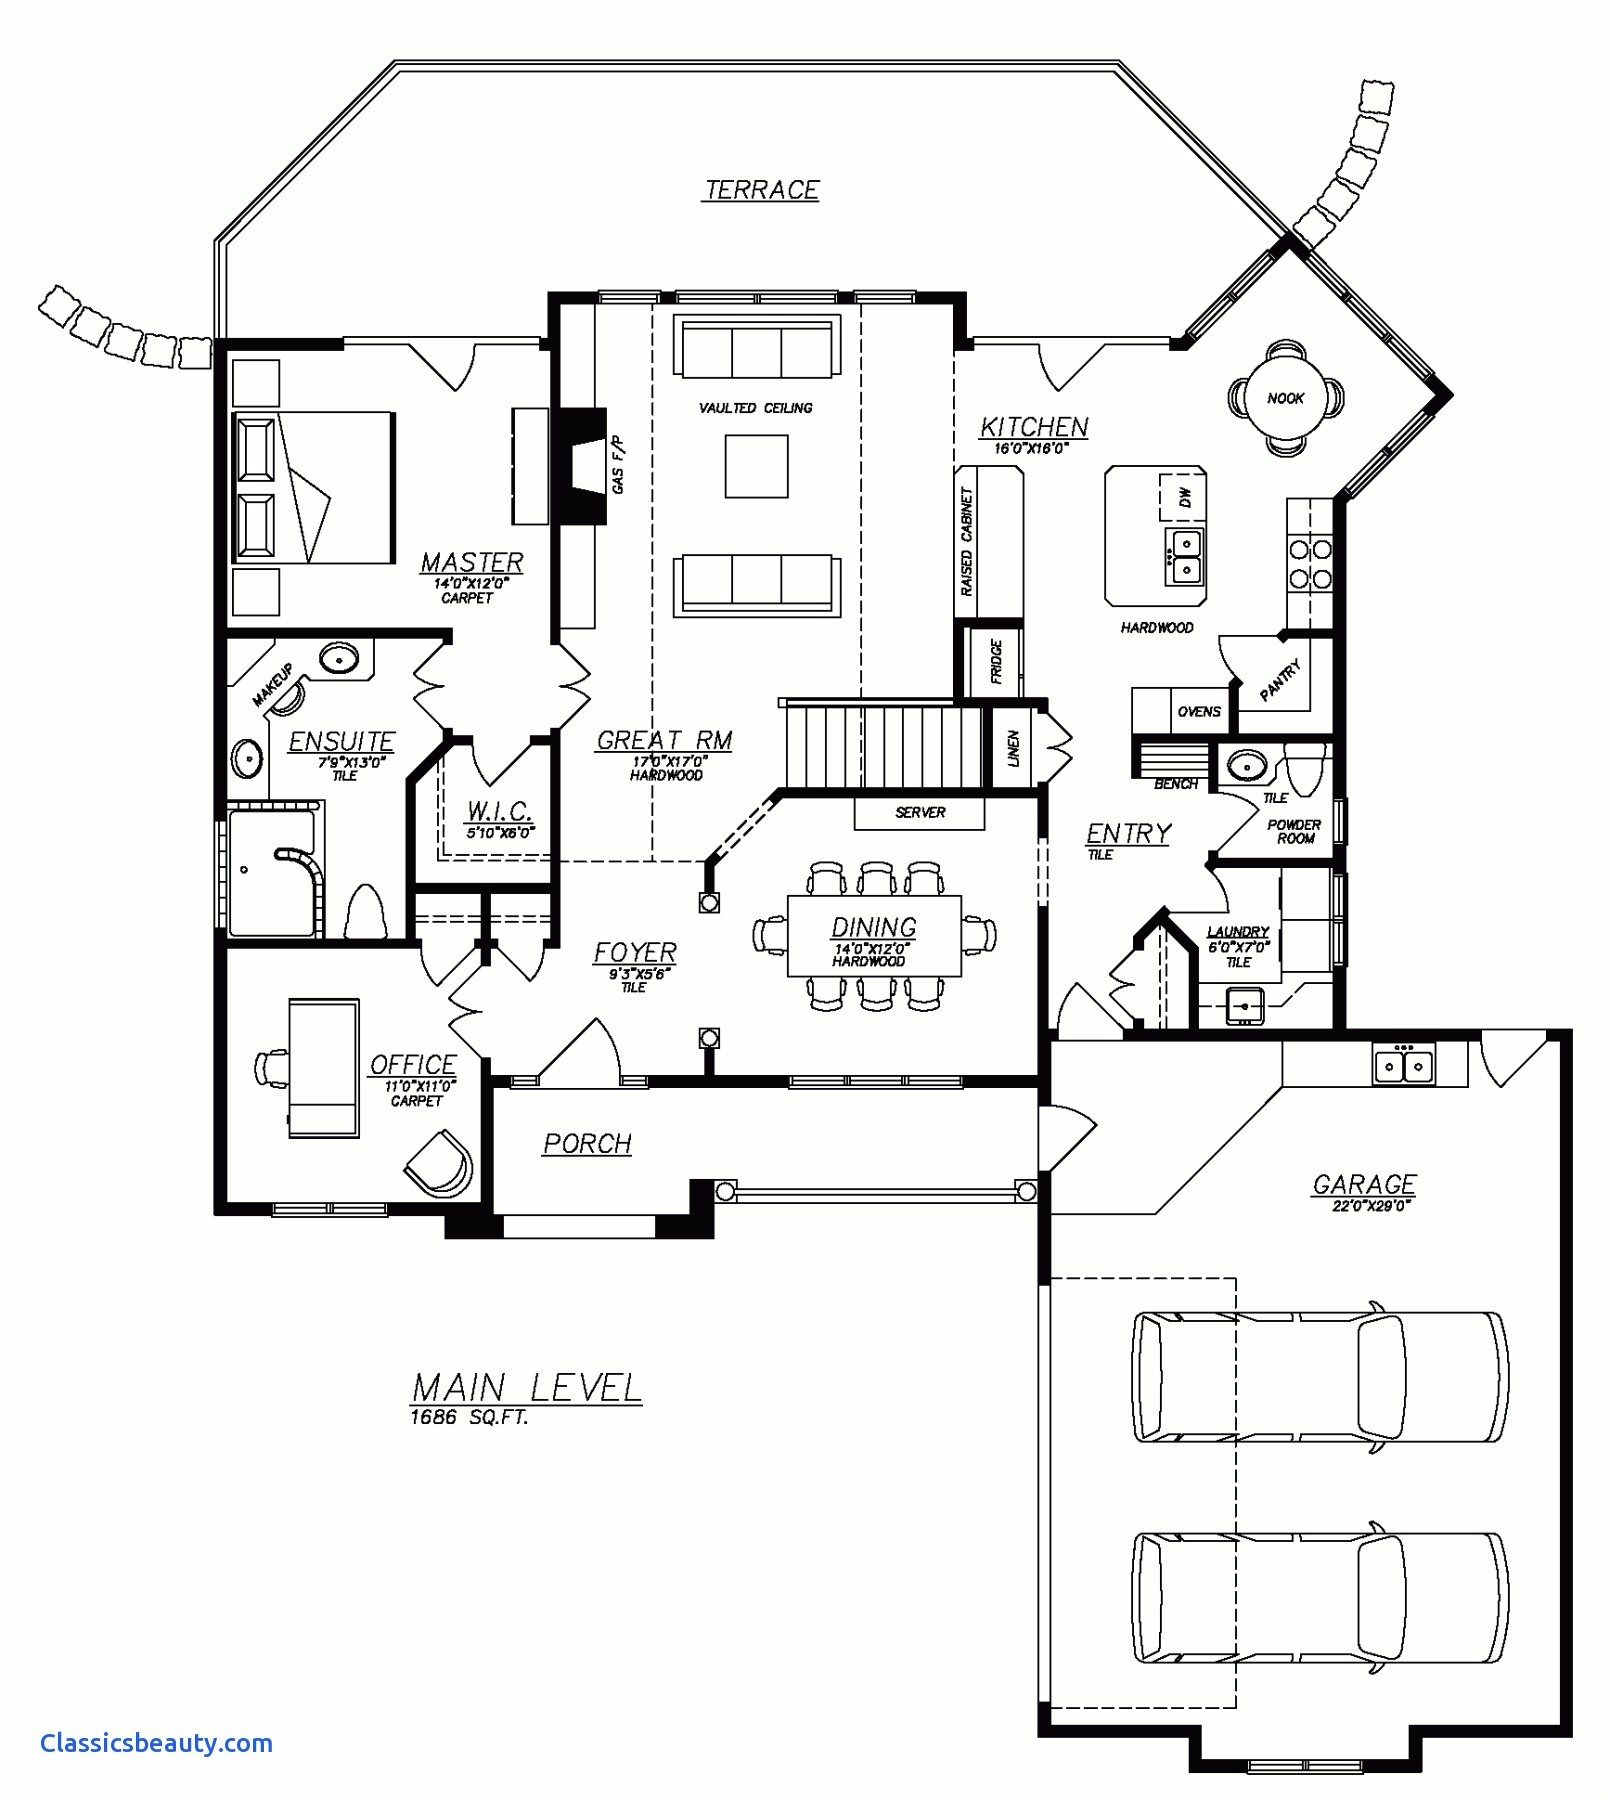 Simple Home Plans to Build Simple House Plans to Build Yourself Escortsea